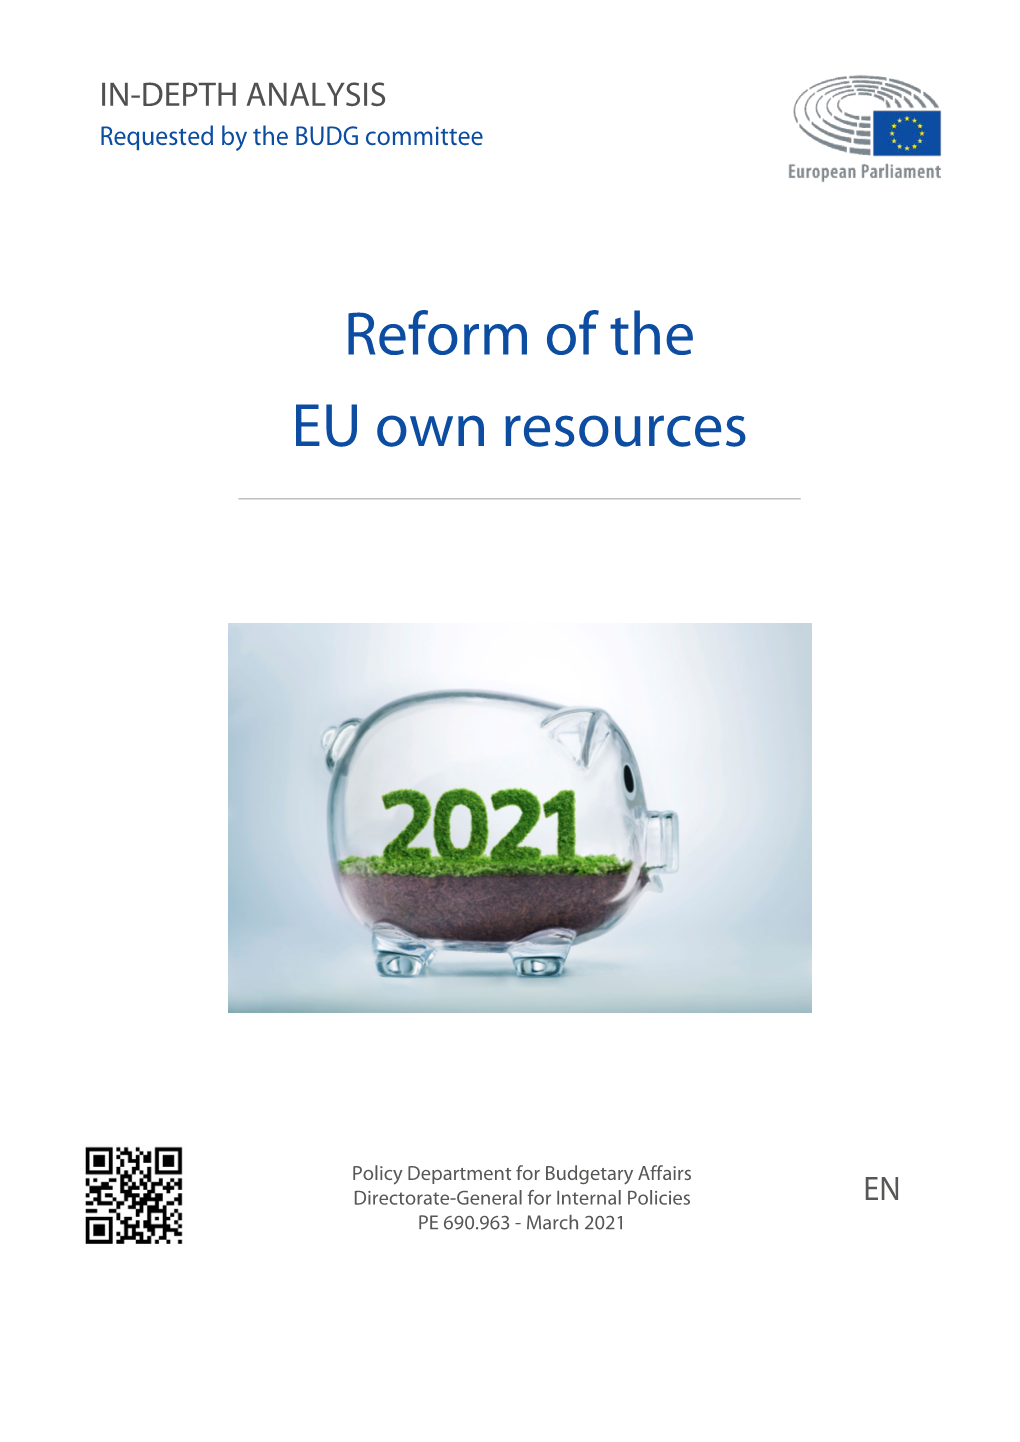 Reform of the EU Own Resources